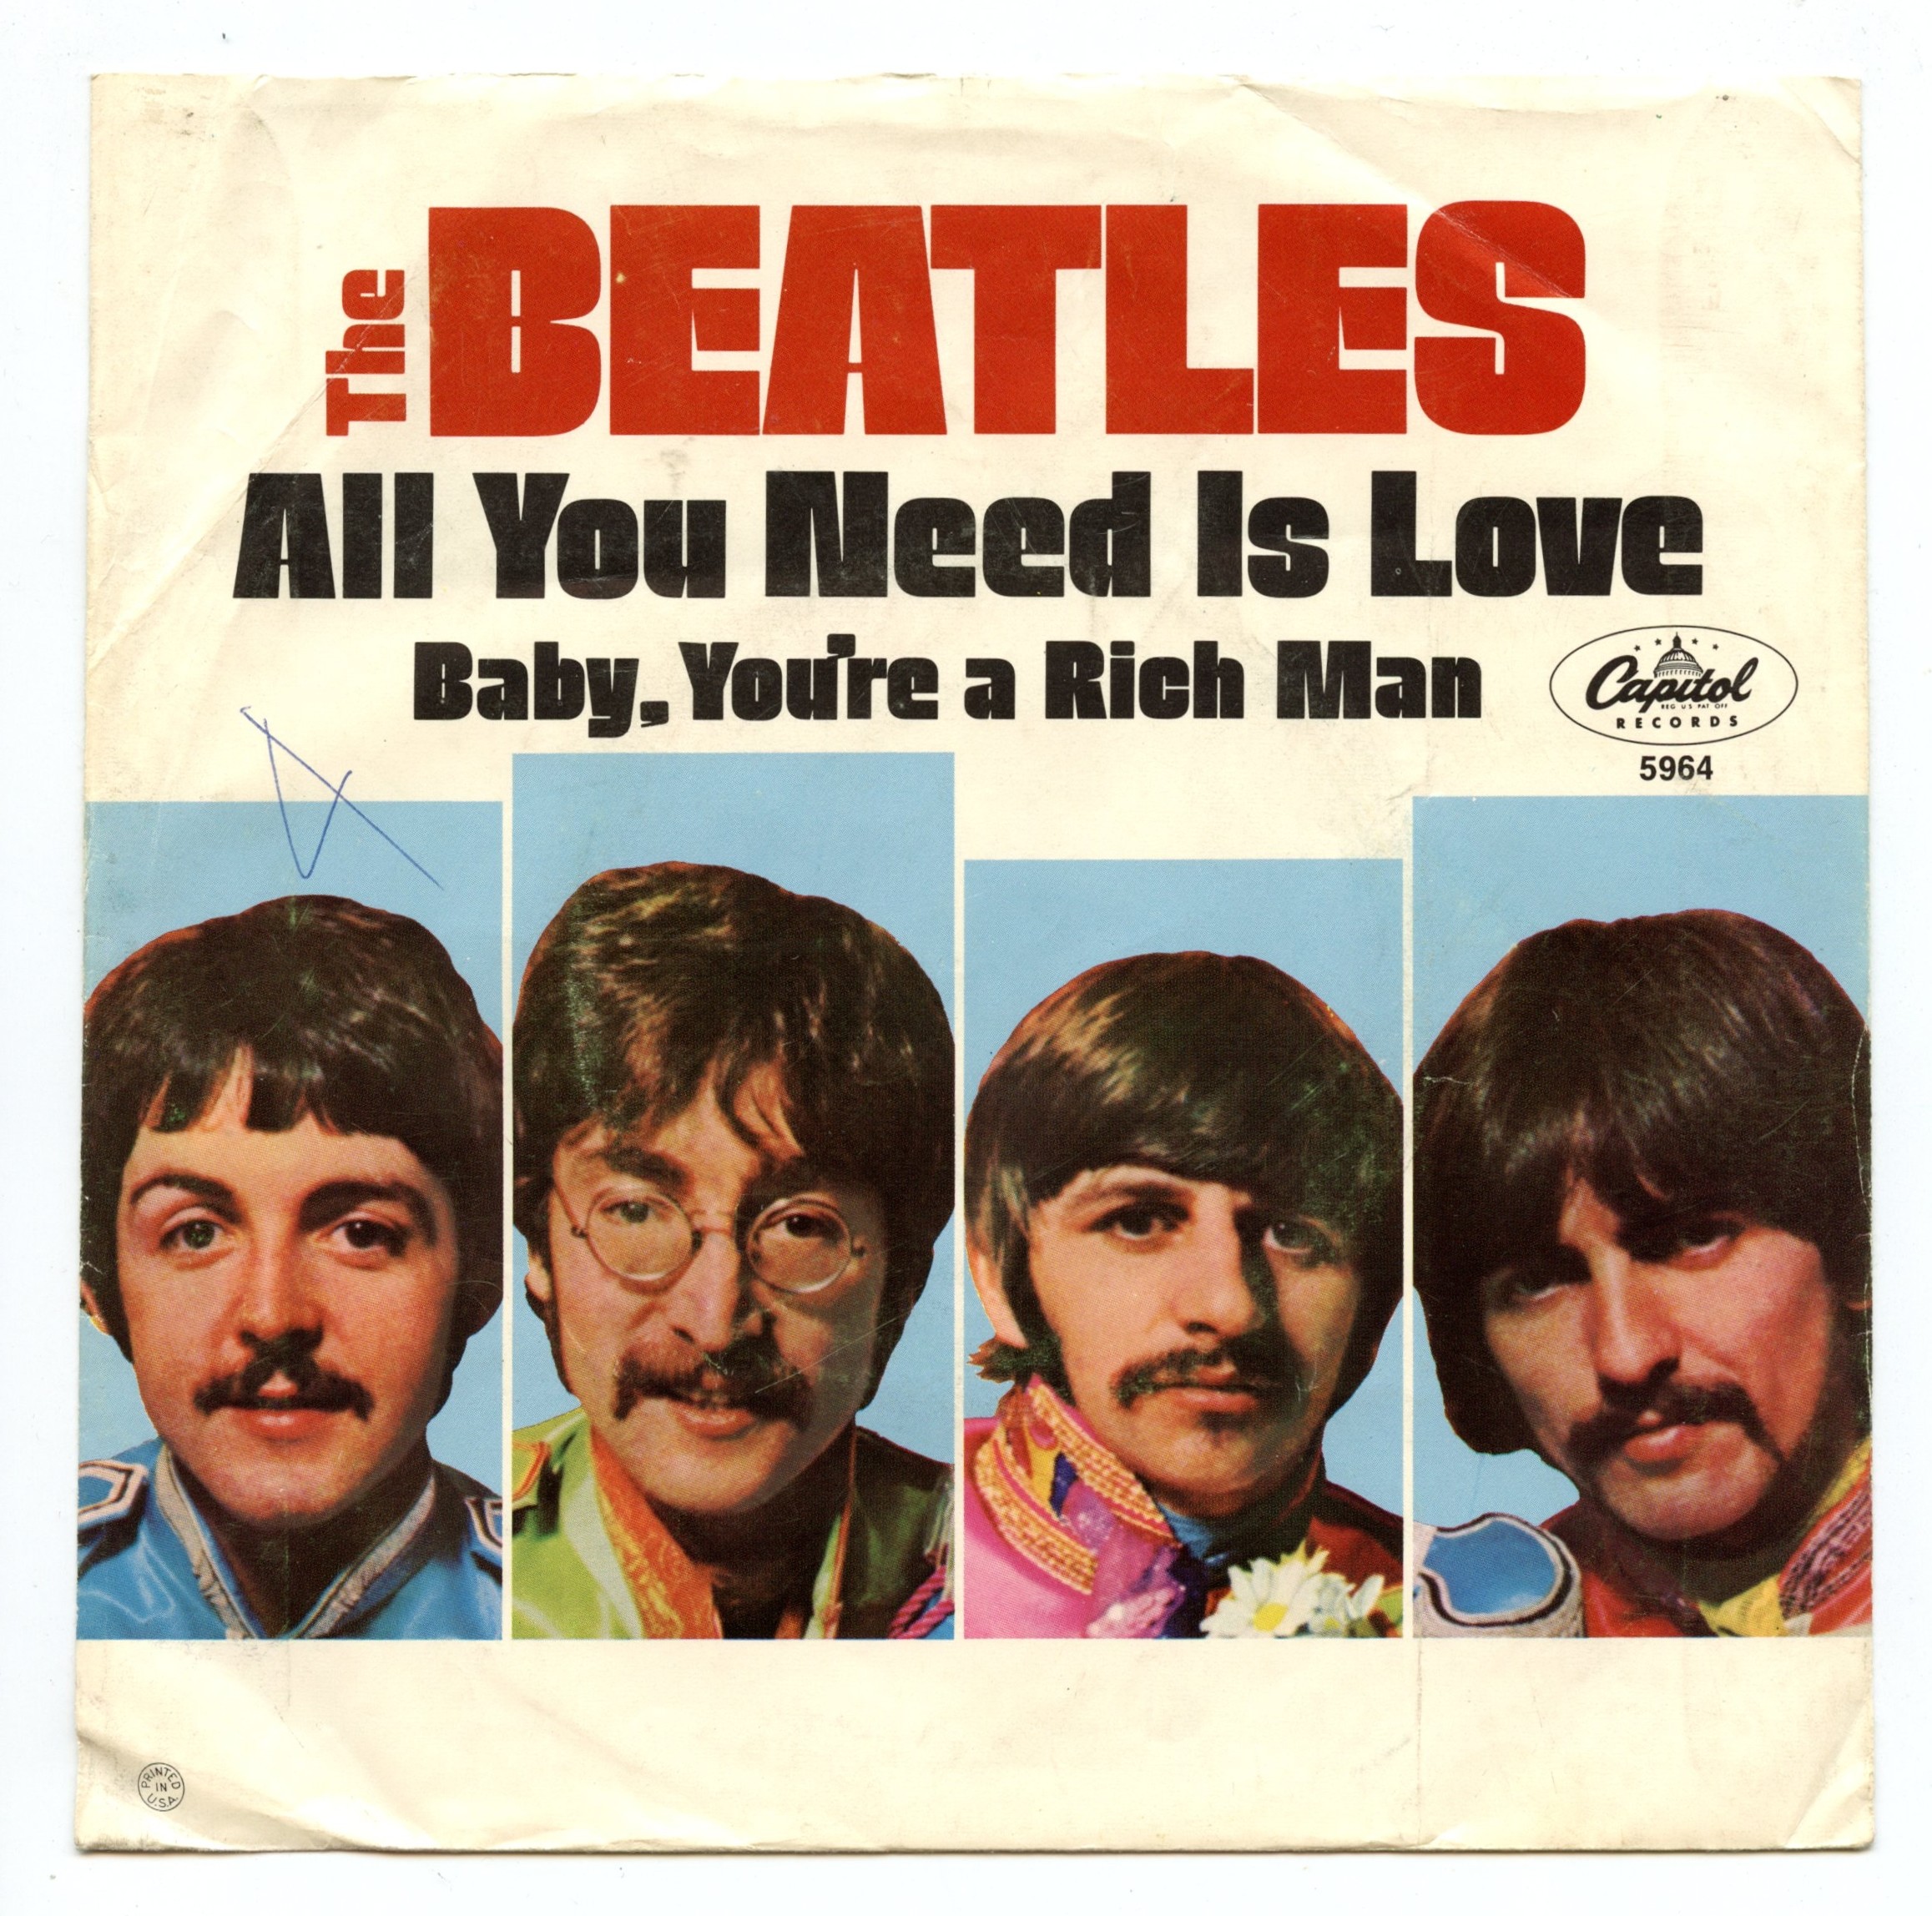 The Beatles Vinyl Single All You Need is Love 1967